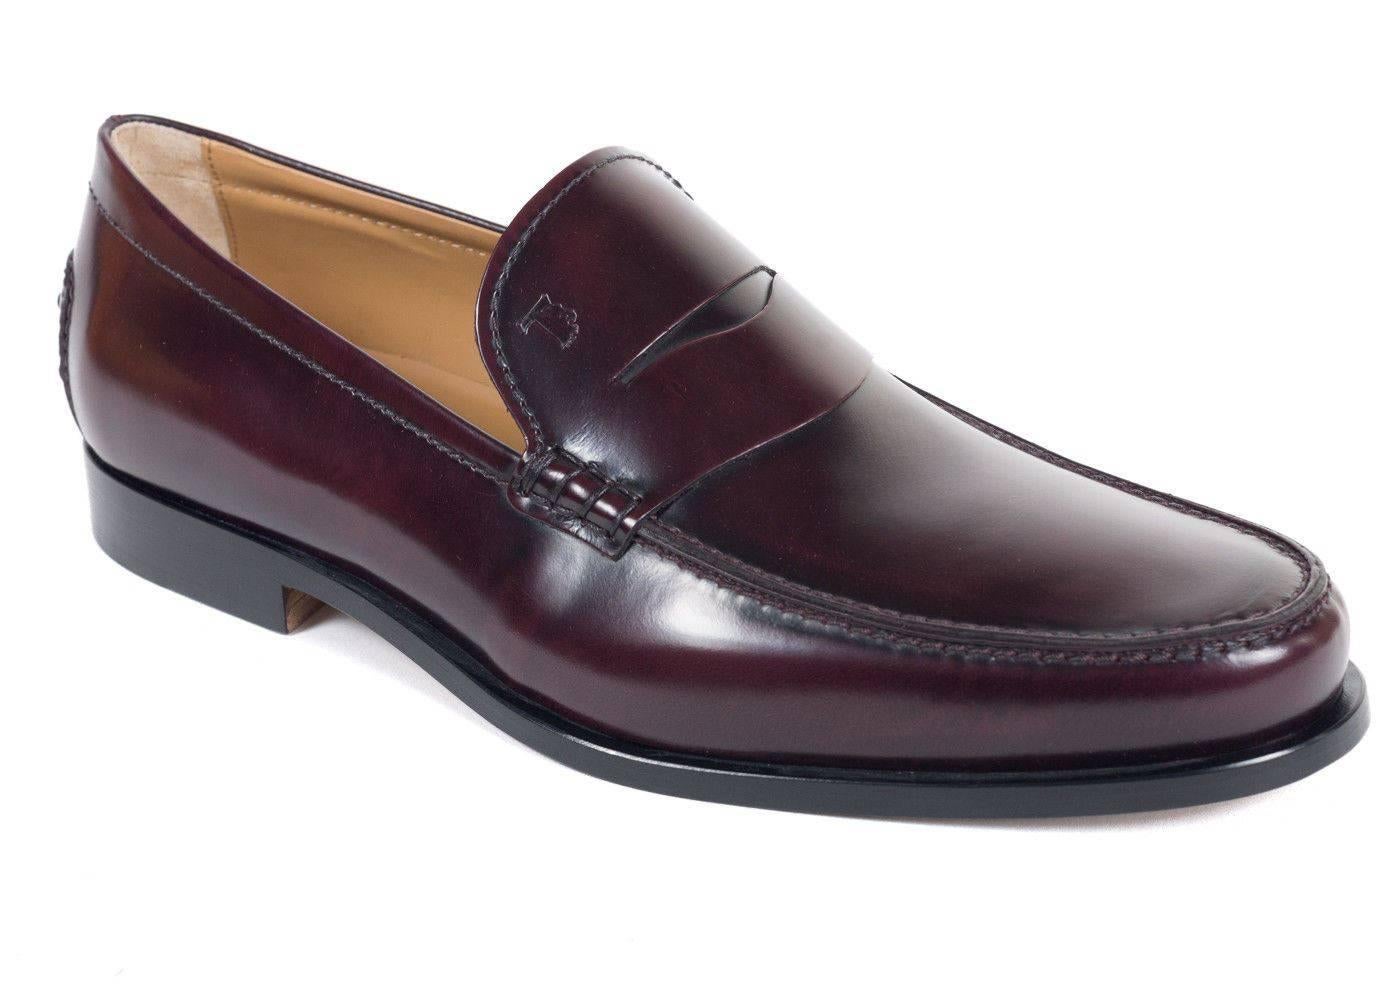 Brand New Tod's Men's Loafers
Original Box & Dust Bag Included
Retails in Stores & Online for $475
Size UK9 / US10
All Shoes are in UK Sizing


Tod's classic penny loafers crafted in burgundy calfskin leather for an ultra smooth look to these shoes.